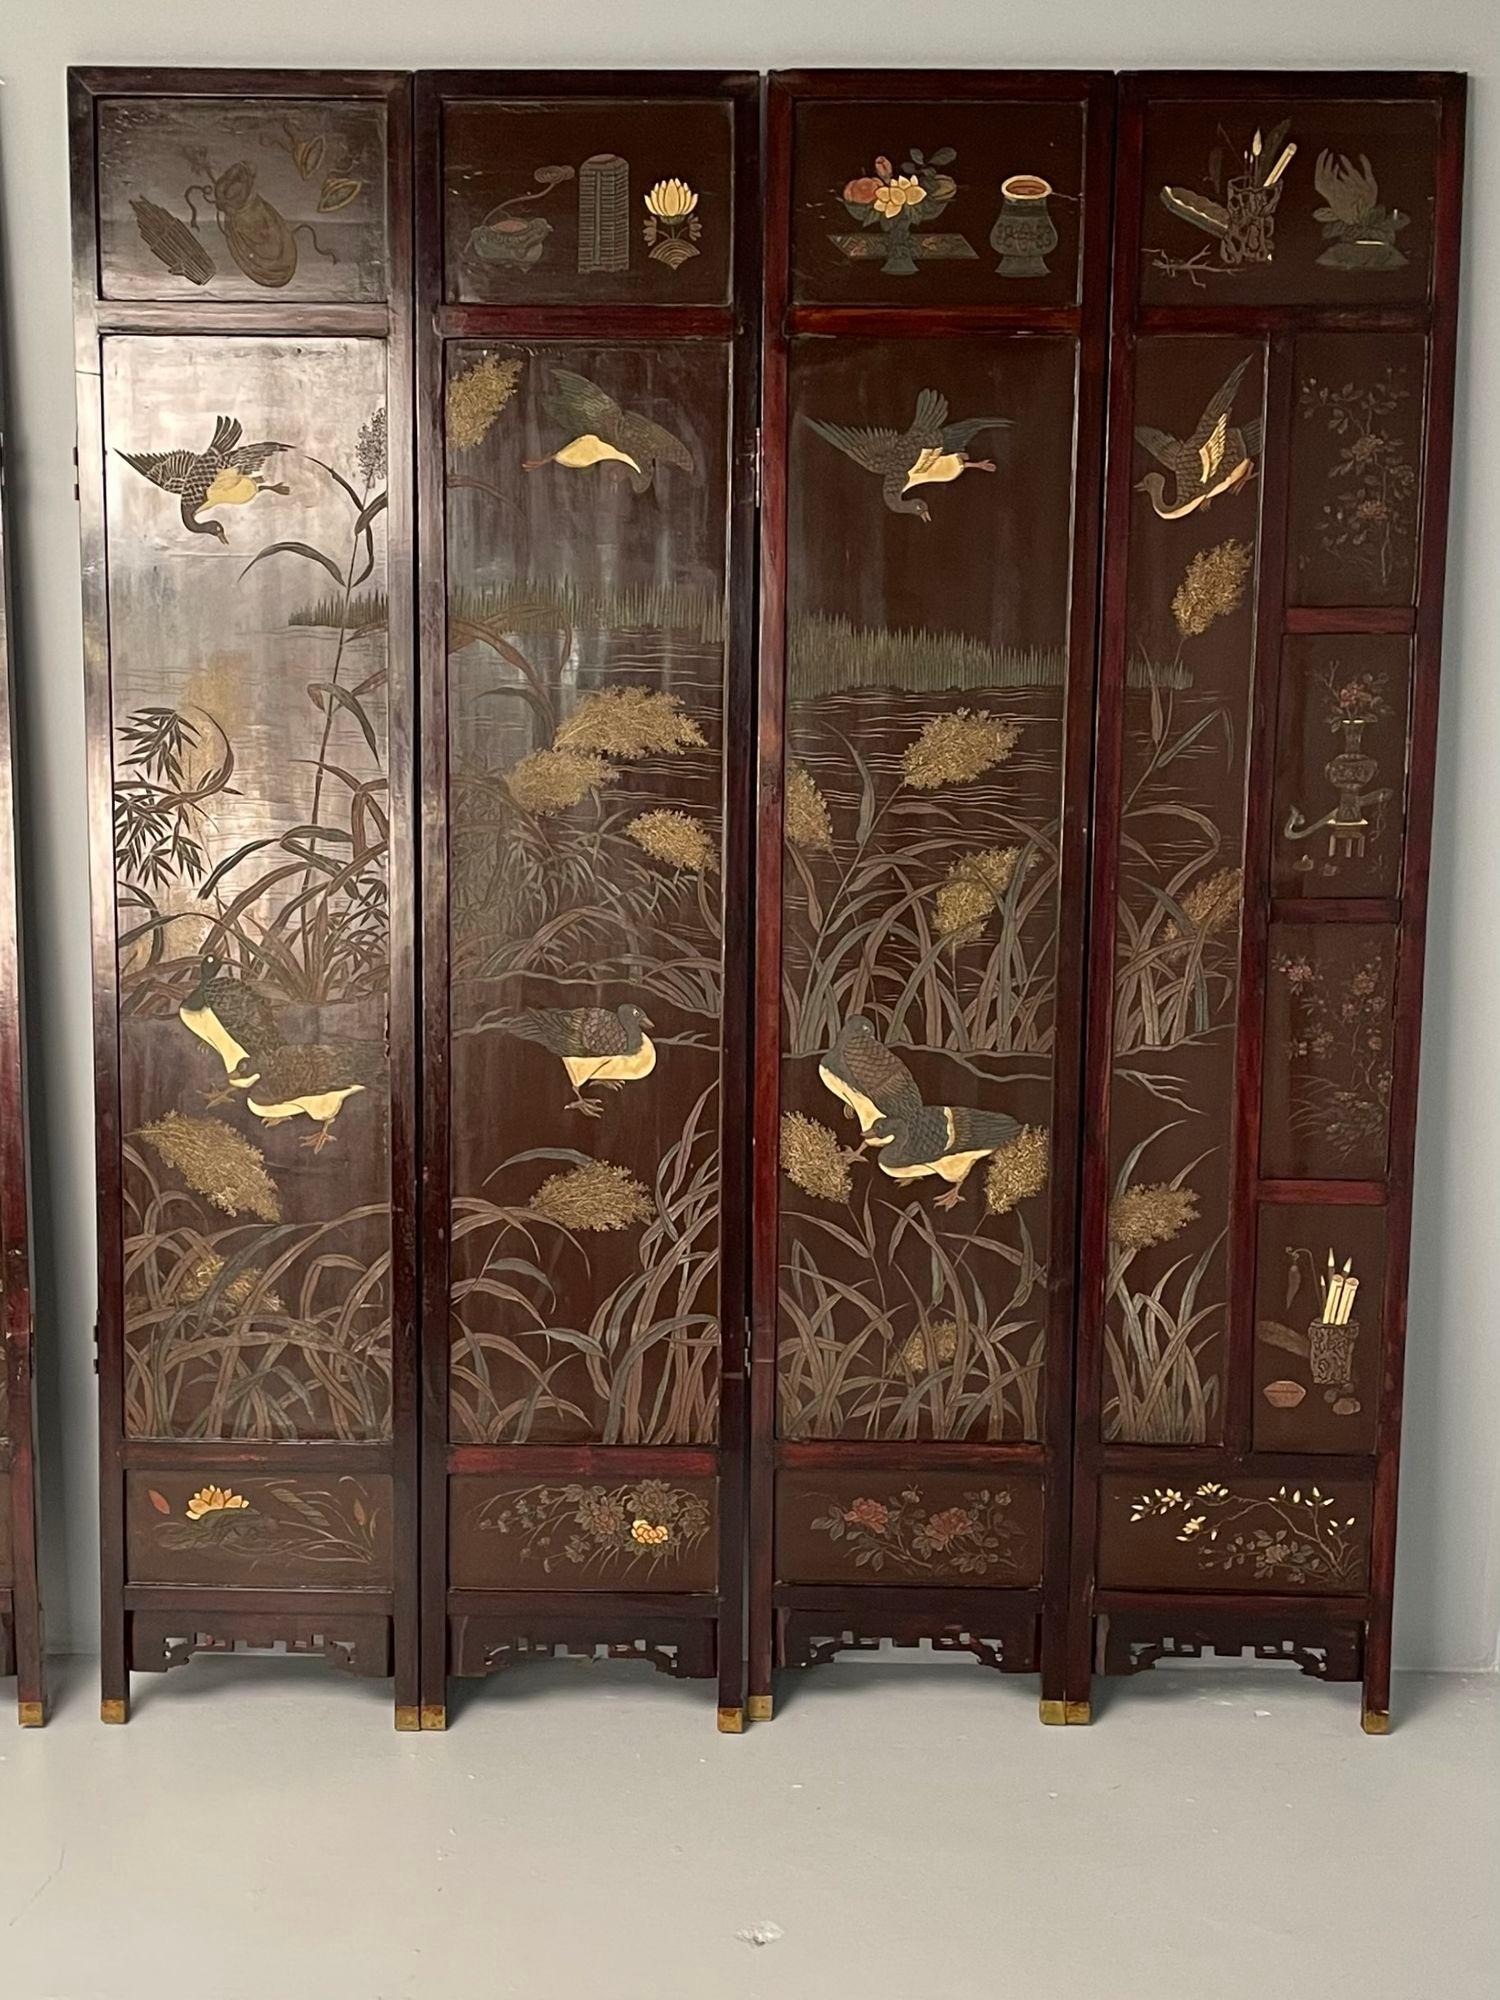 Unusual Eight Panel Chinese Coromandel Screen circa 1700-1800 with Carved Frame For Sale 7